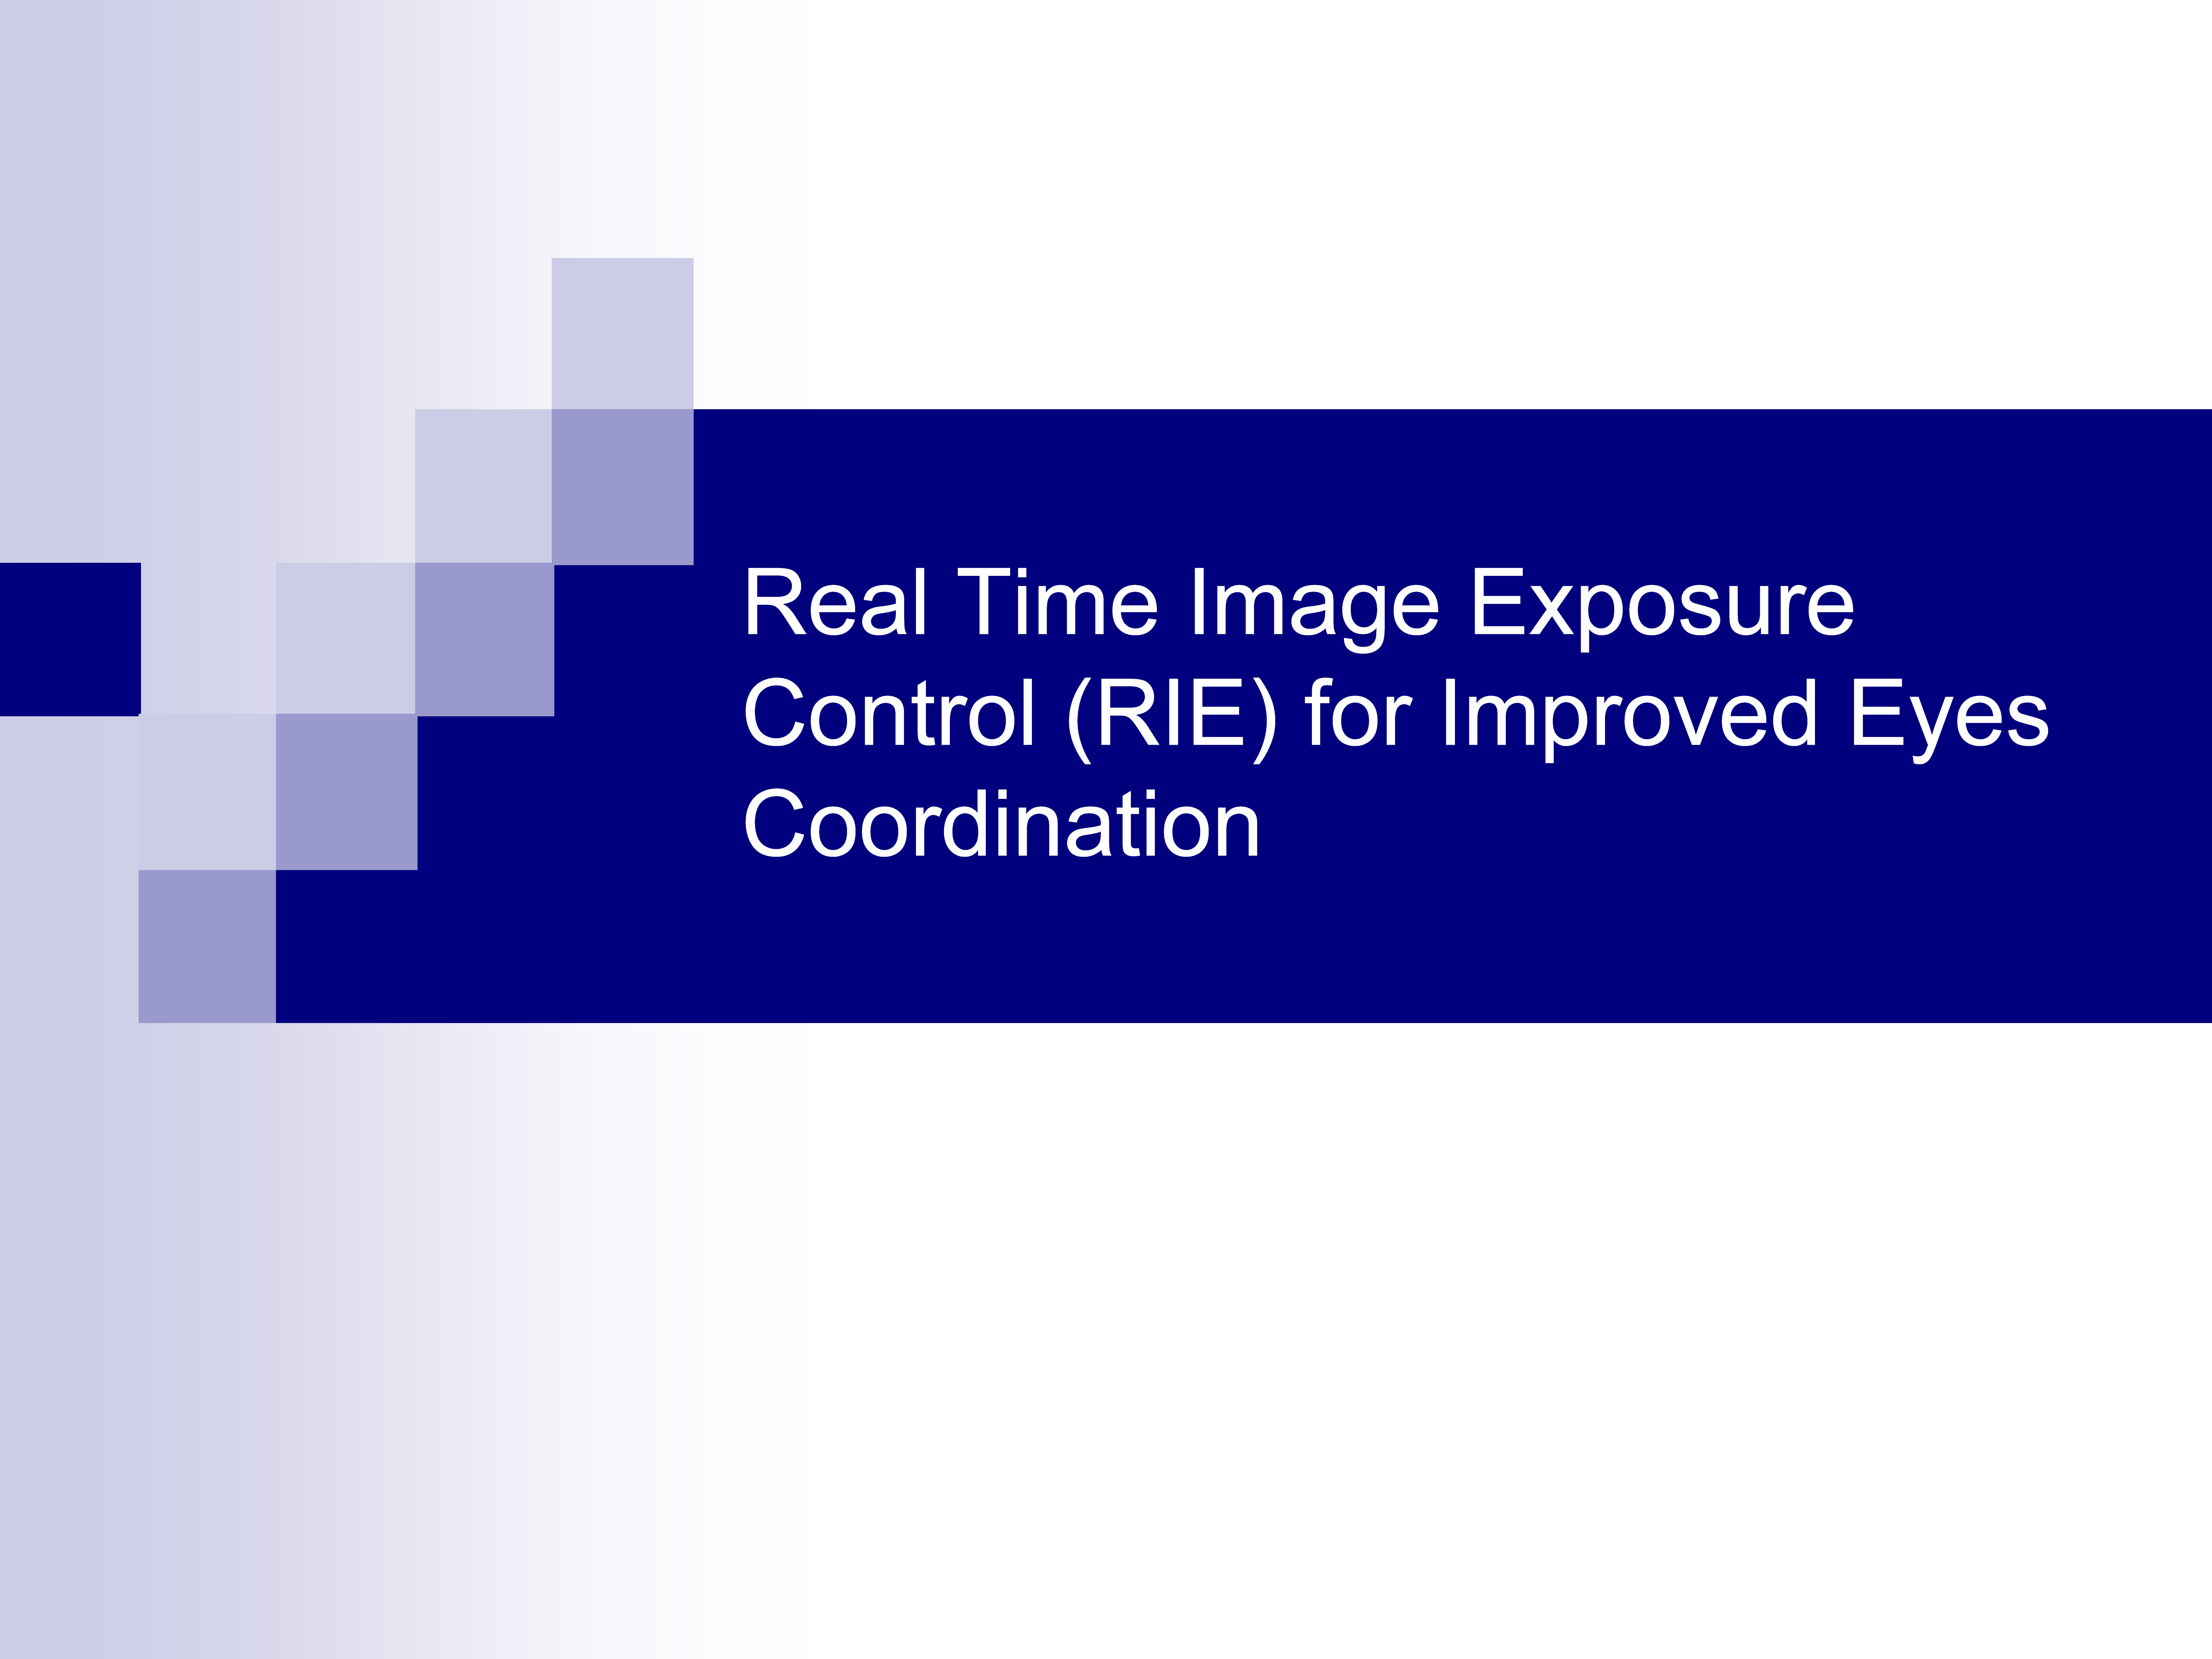 Real Time Image Exposure Control